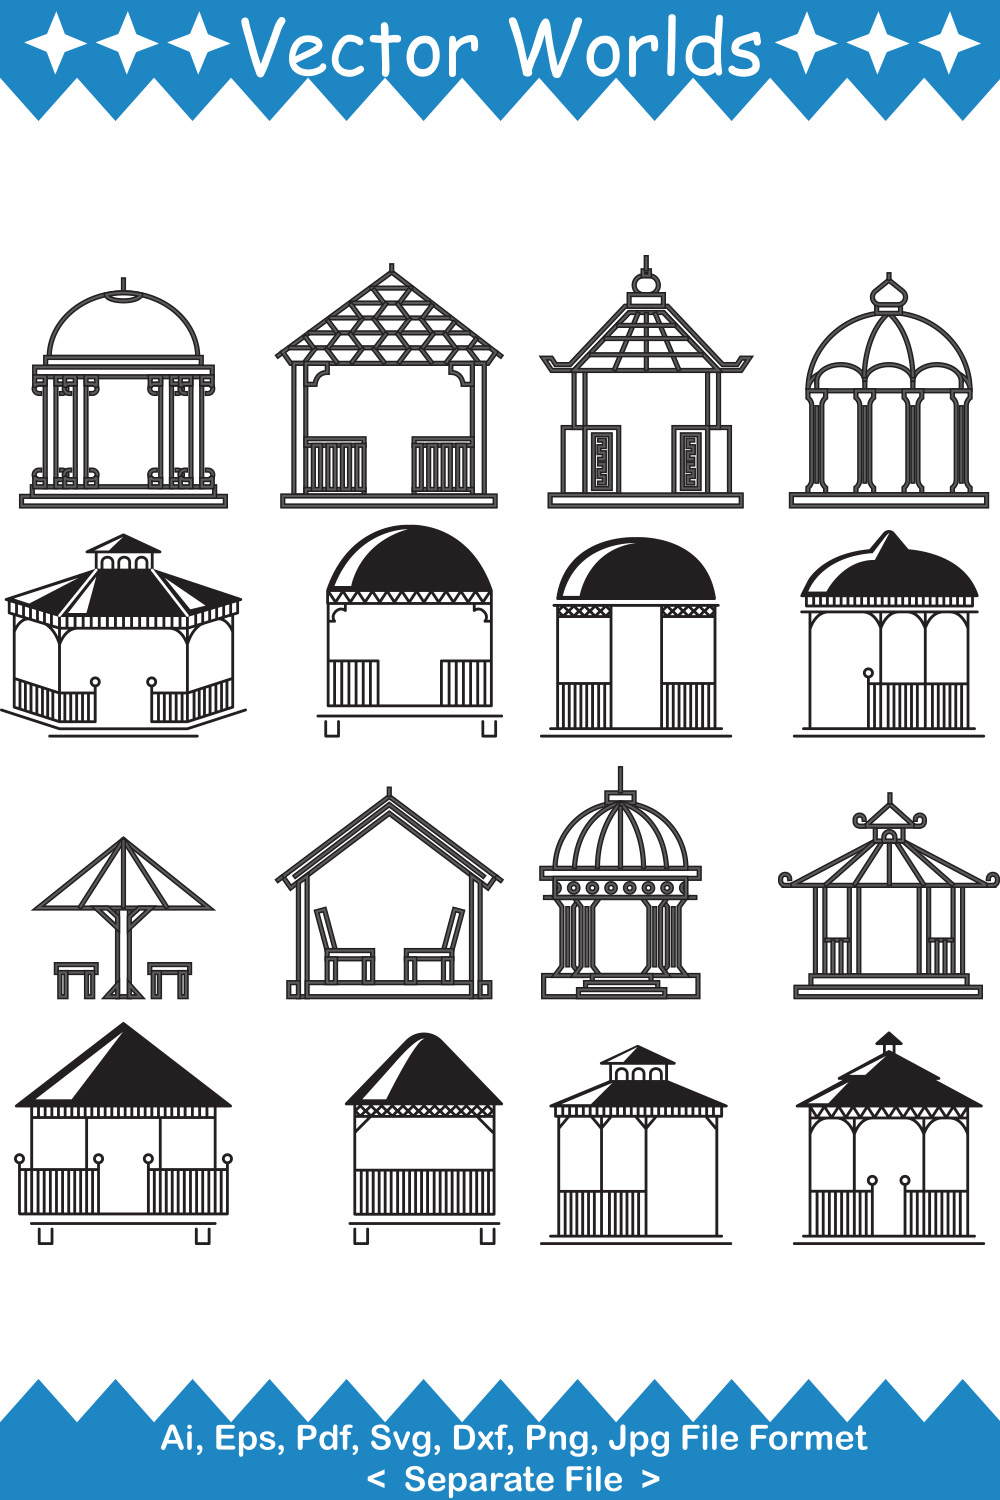 Set of vector charming images of gazebo silhouettes.